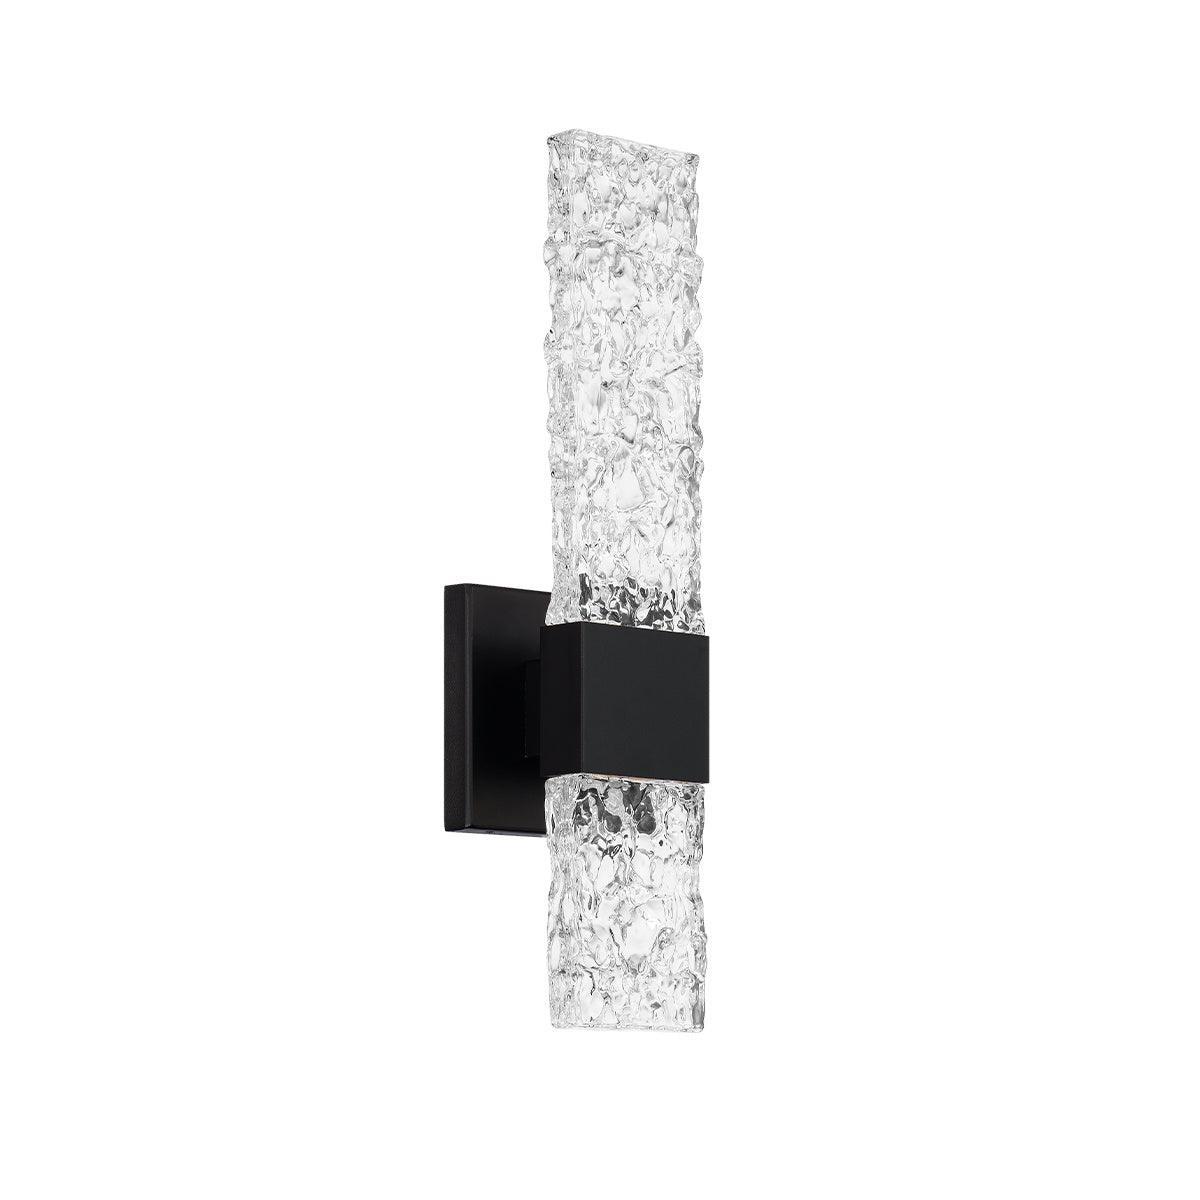 Modern Forms - Reflect LED Outdoor Wall Light - WS-W20118-BK | Montreal Lighting & Hardware